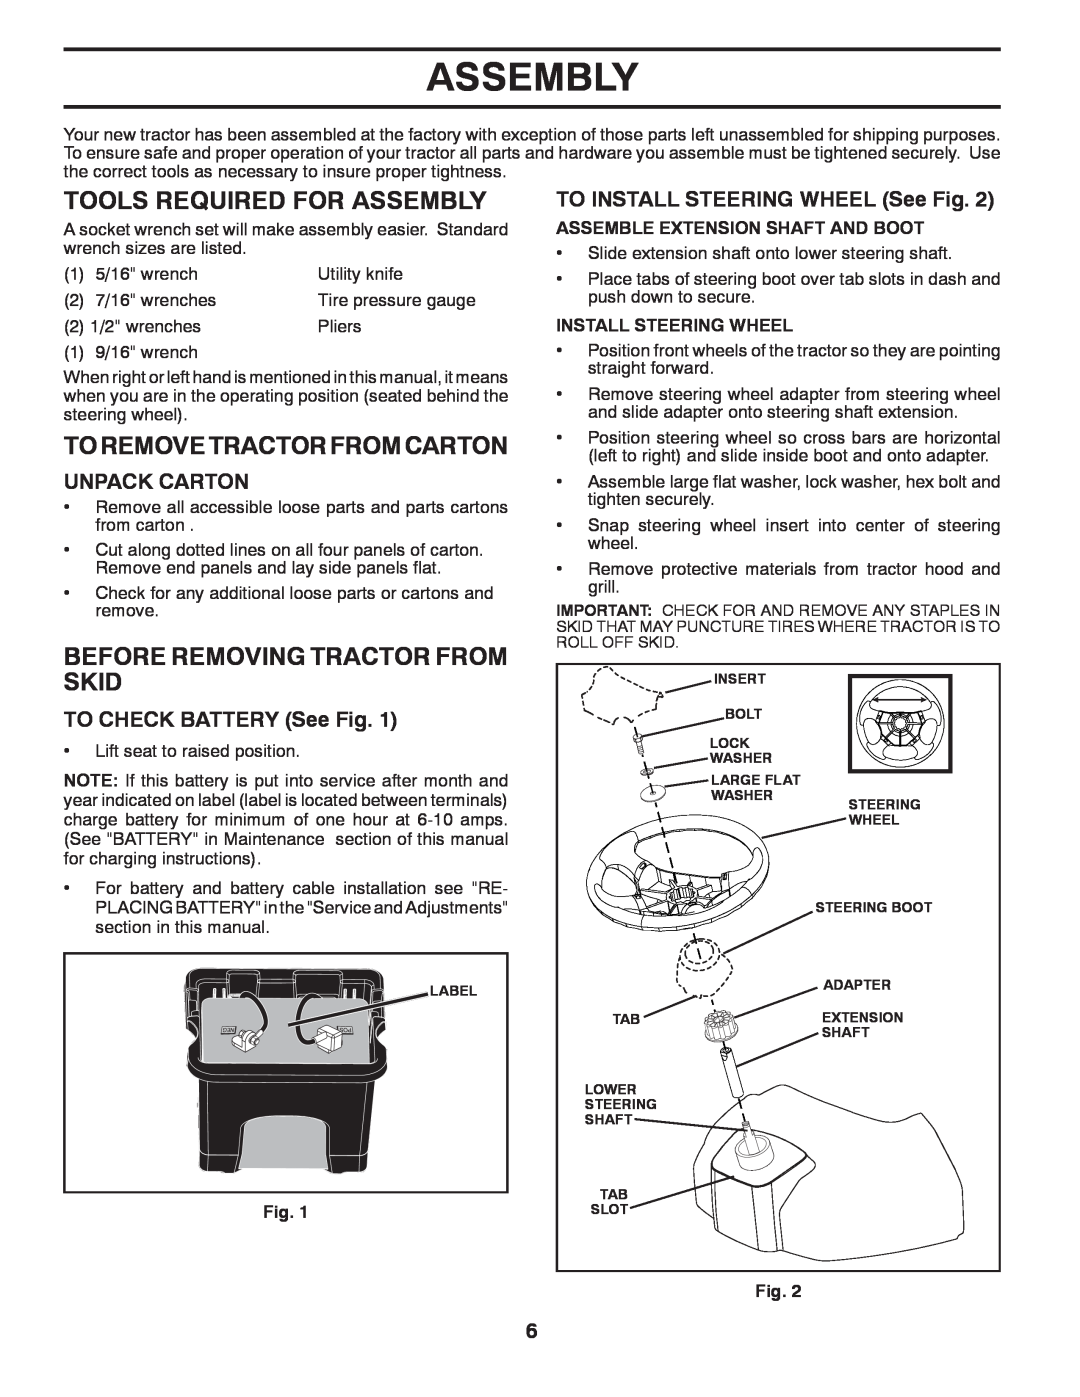 McCulloch 96041011501 manual Tools Required For Assembly, Toremovetractorfromcarton, Before Removing Tractor From Skid 